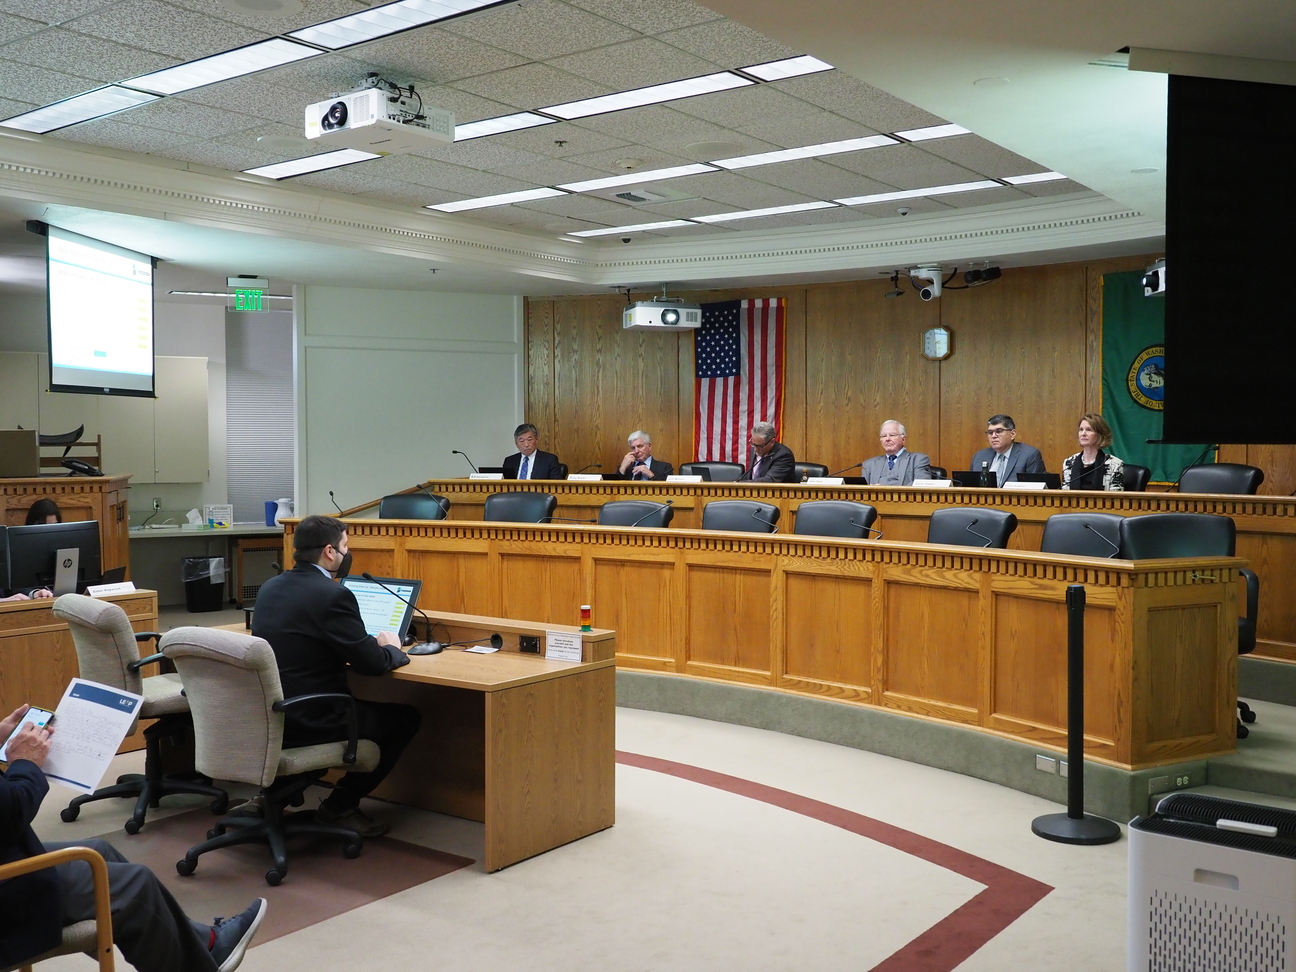 NPI founder testifies in support of repealing TIm Eyman's "advisory votes"